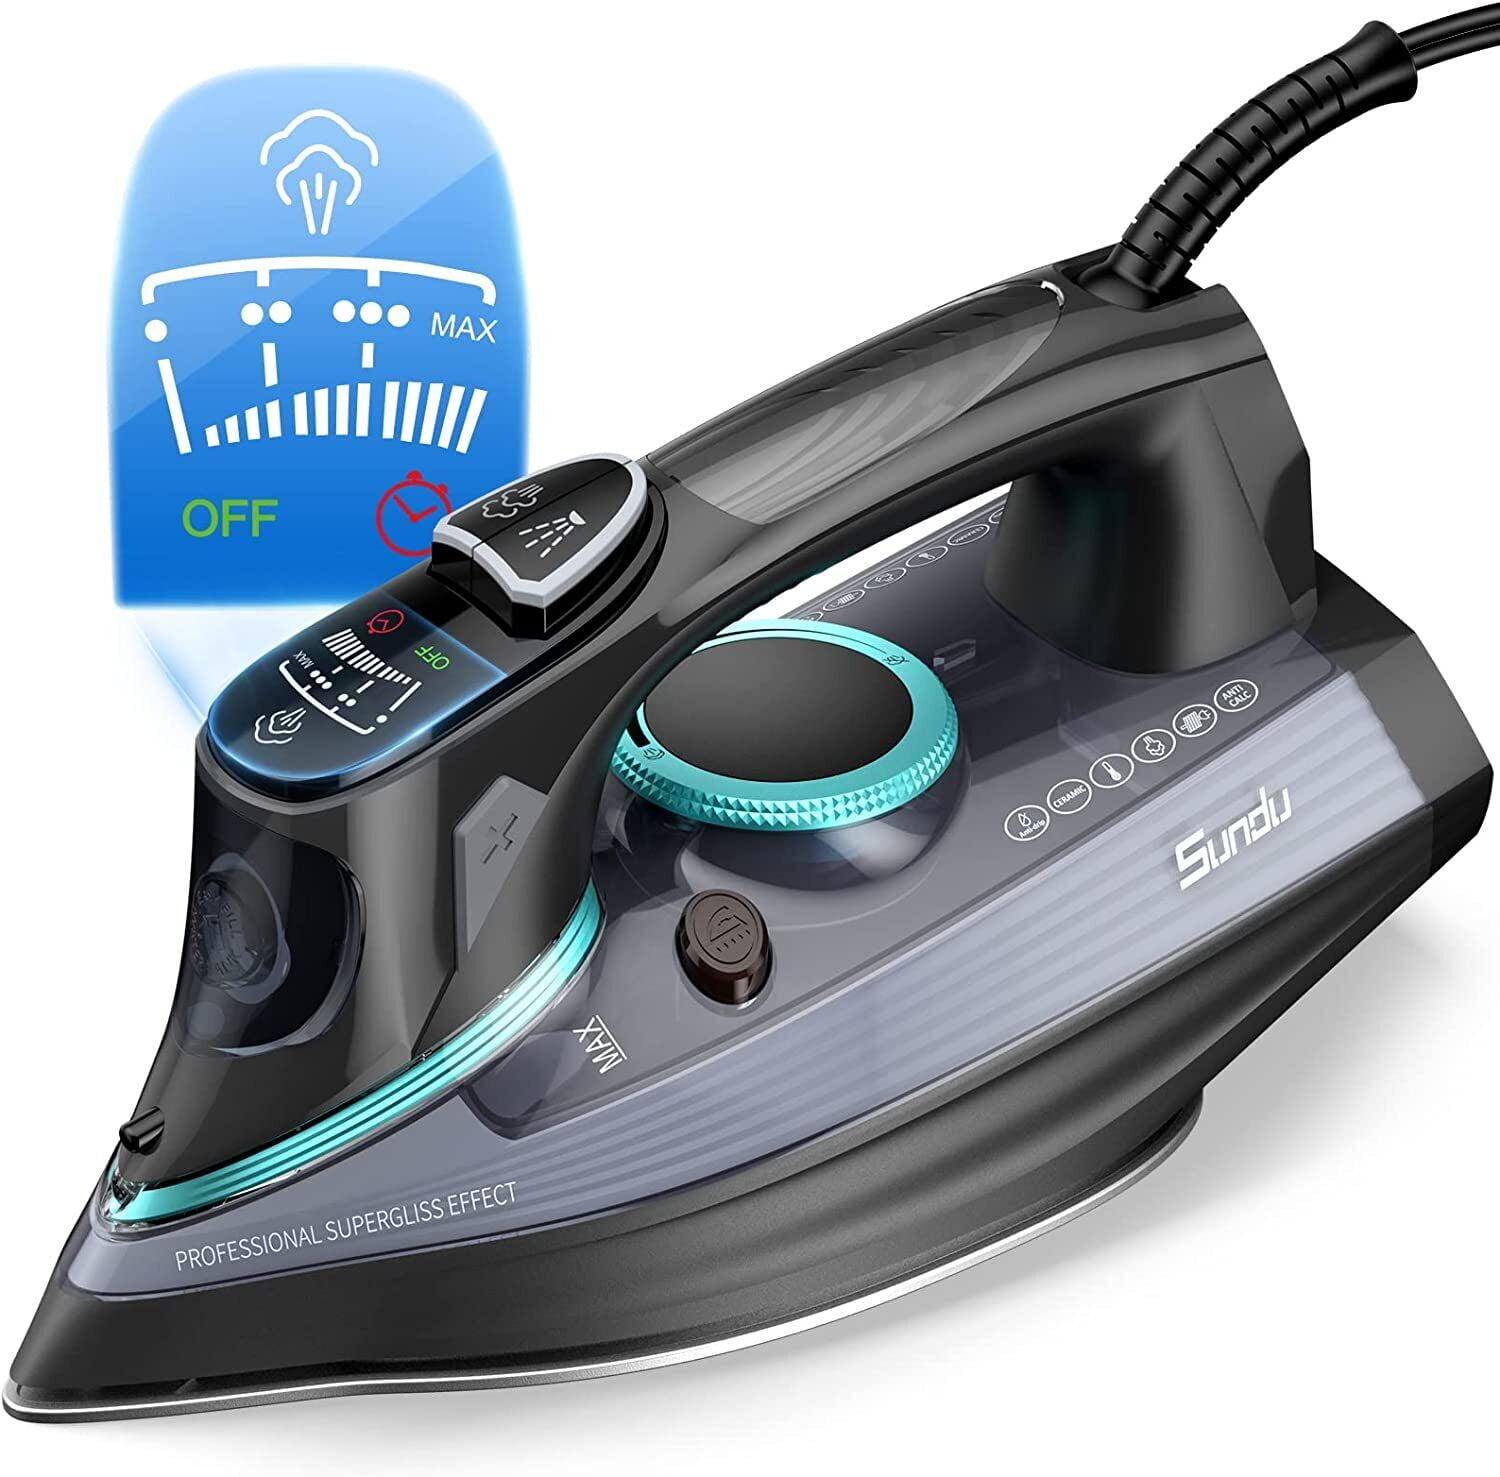 Republic Day Sale: Avail up to 63% savings on steam irons